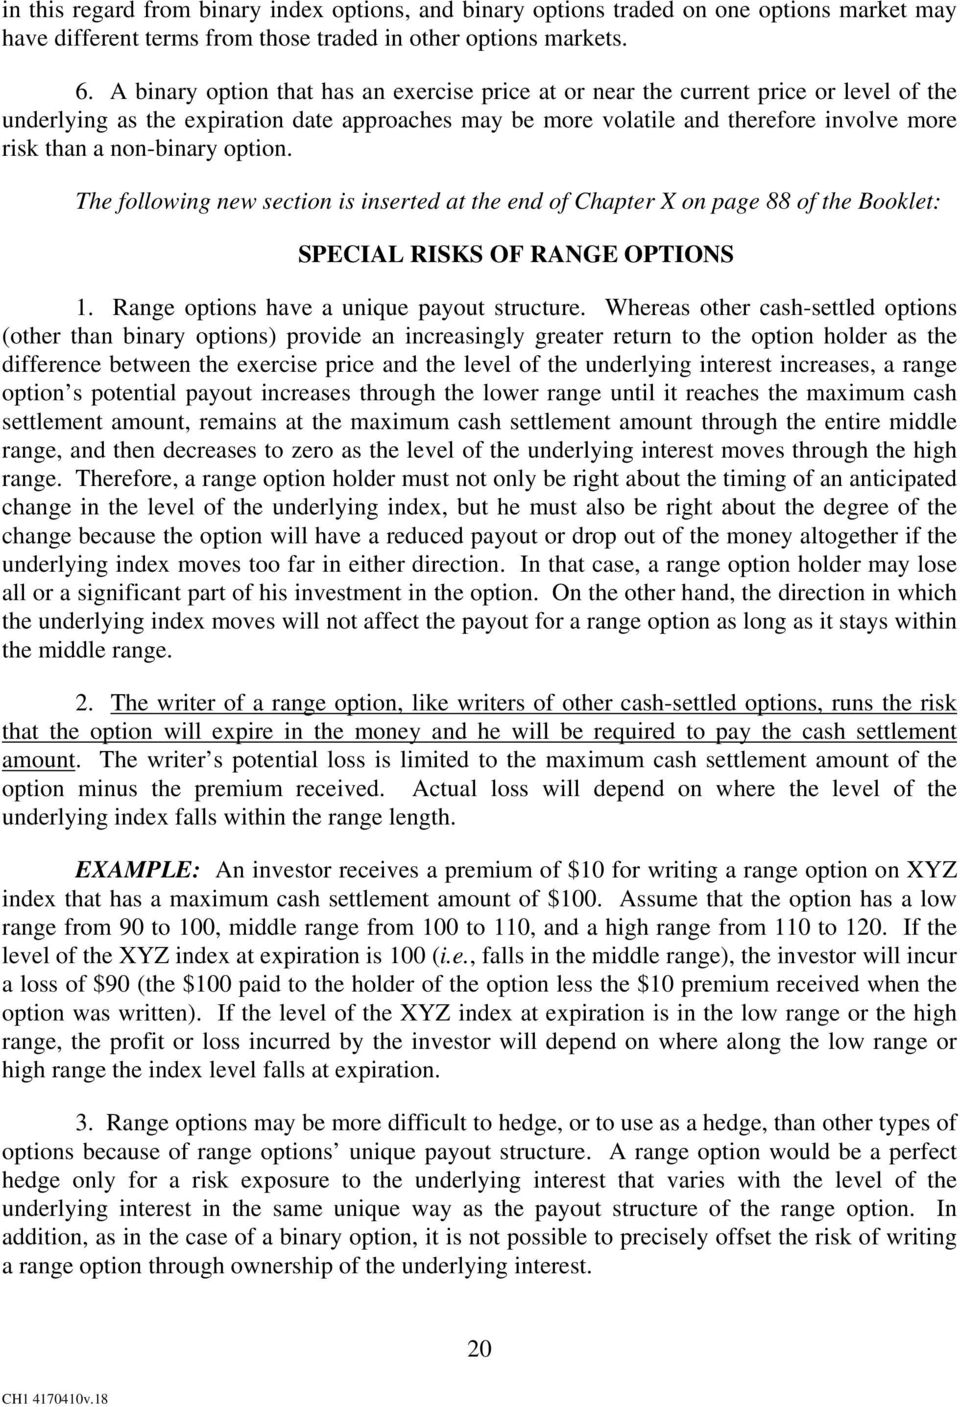 non-binary option. The following new section is inserted at the end of Chapter X on page 88 of the Booklet: SPECIAL RISKS OF RANGE OPTIONS 1. Range options have a unique payout structure.